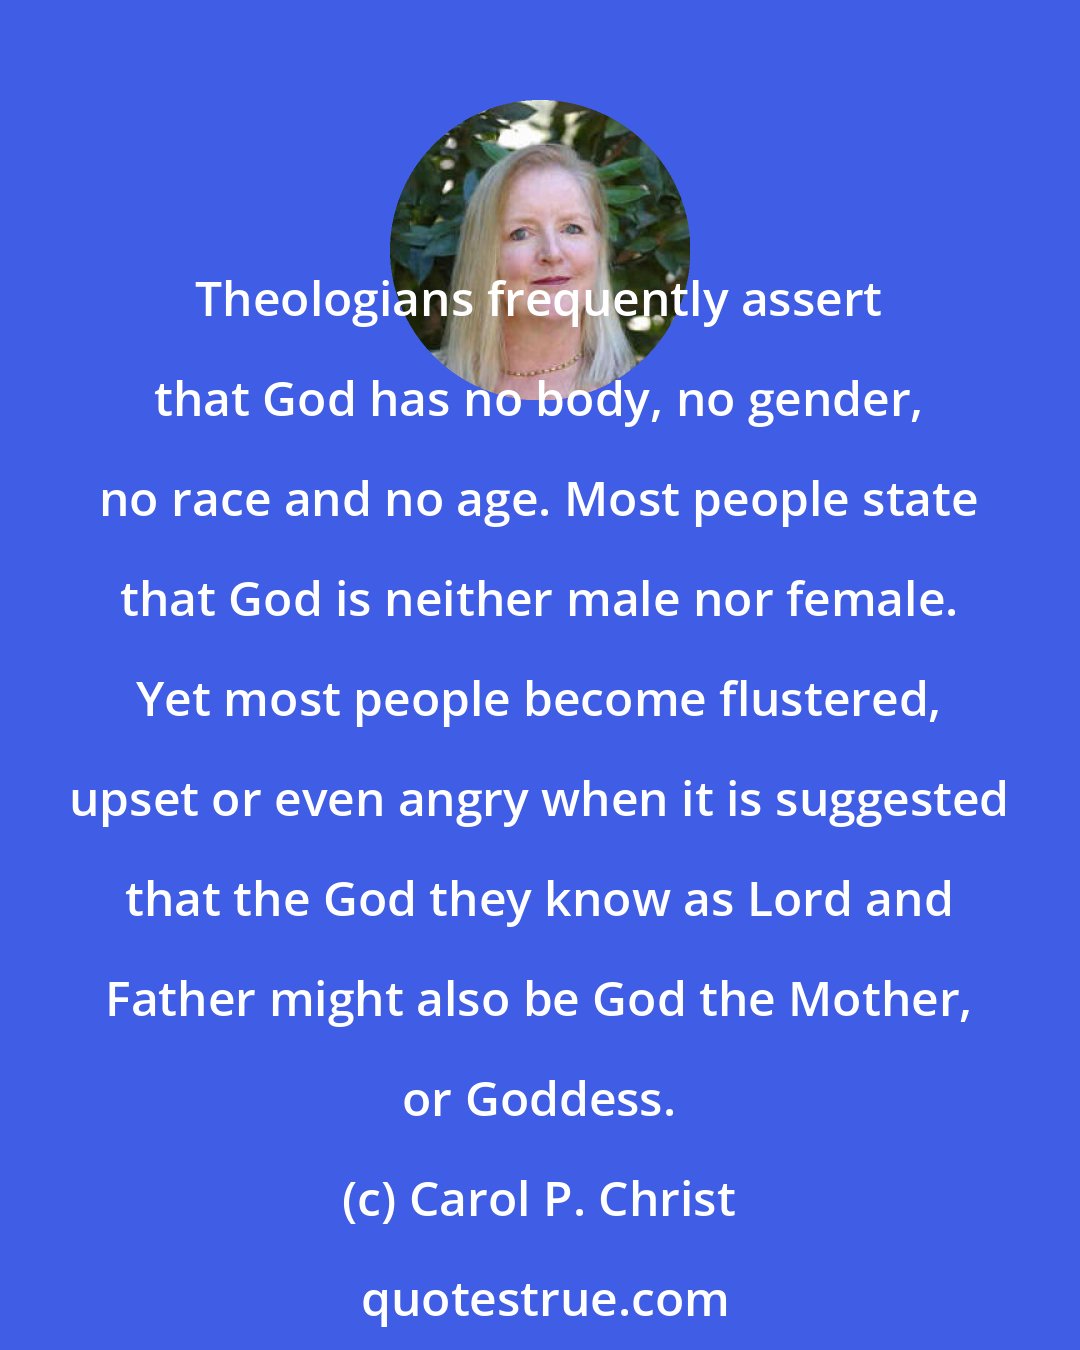 Carol P. Christ: Theologians frequently assert that God has no body, no gender, no race and no age. Most people state that God is neither male nor female. Yet most people become flustered, upset or even angry when it is suggested that the God they know as Lord and Father might also be God the Mother, or Goddess.